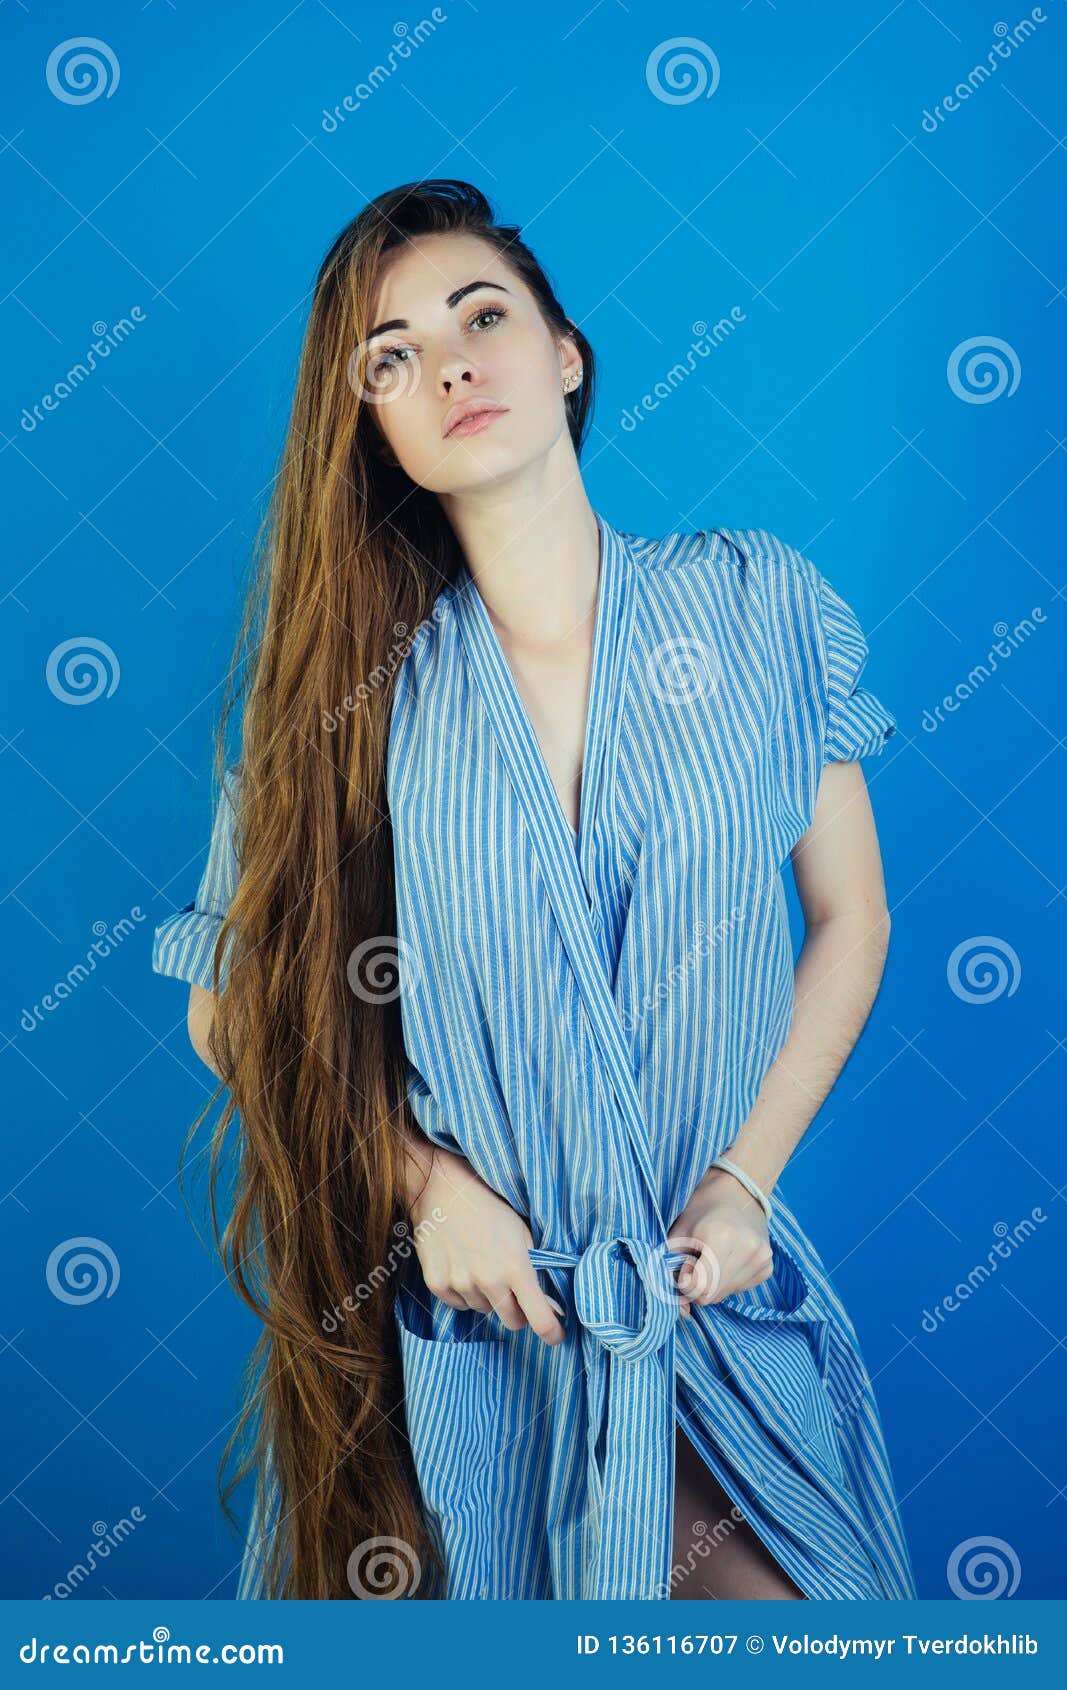 A Young Cute Girl In A White Dress Poses Beautifully Positive Attitude  Stock Photo - Download Image Now - iStock